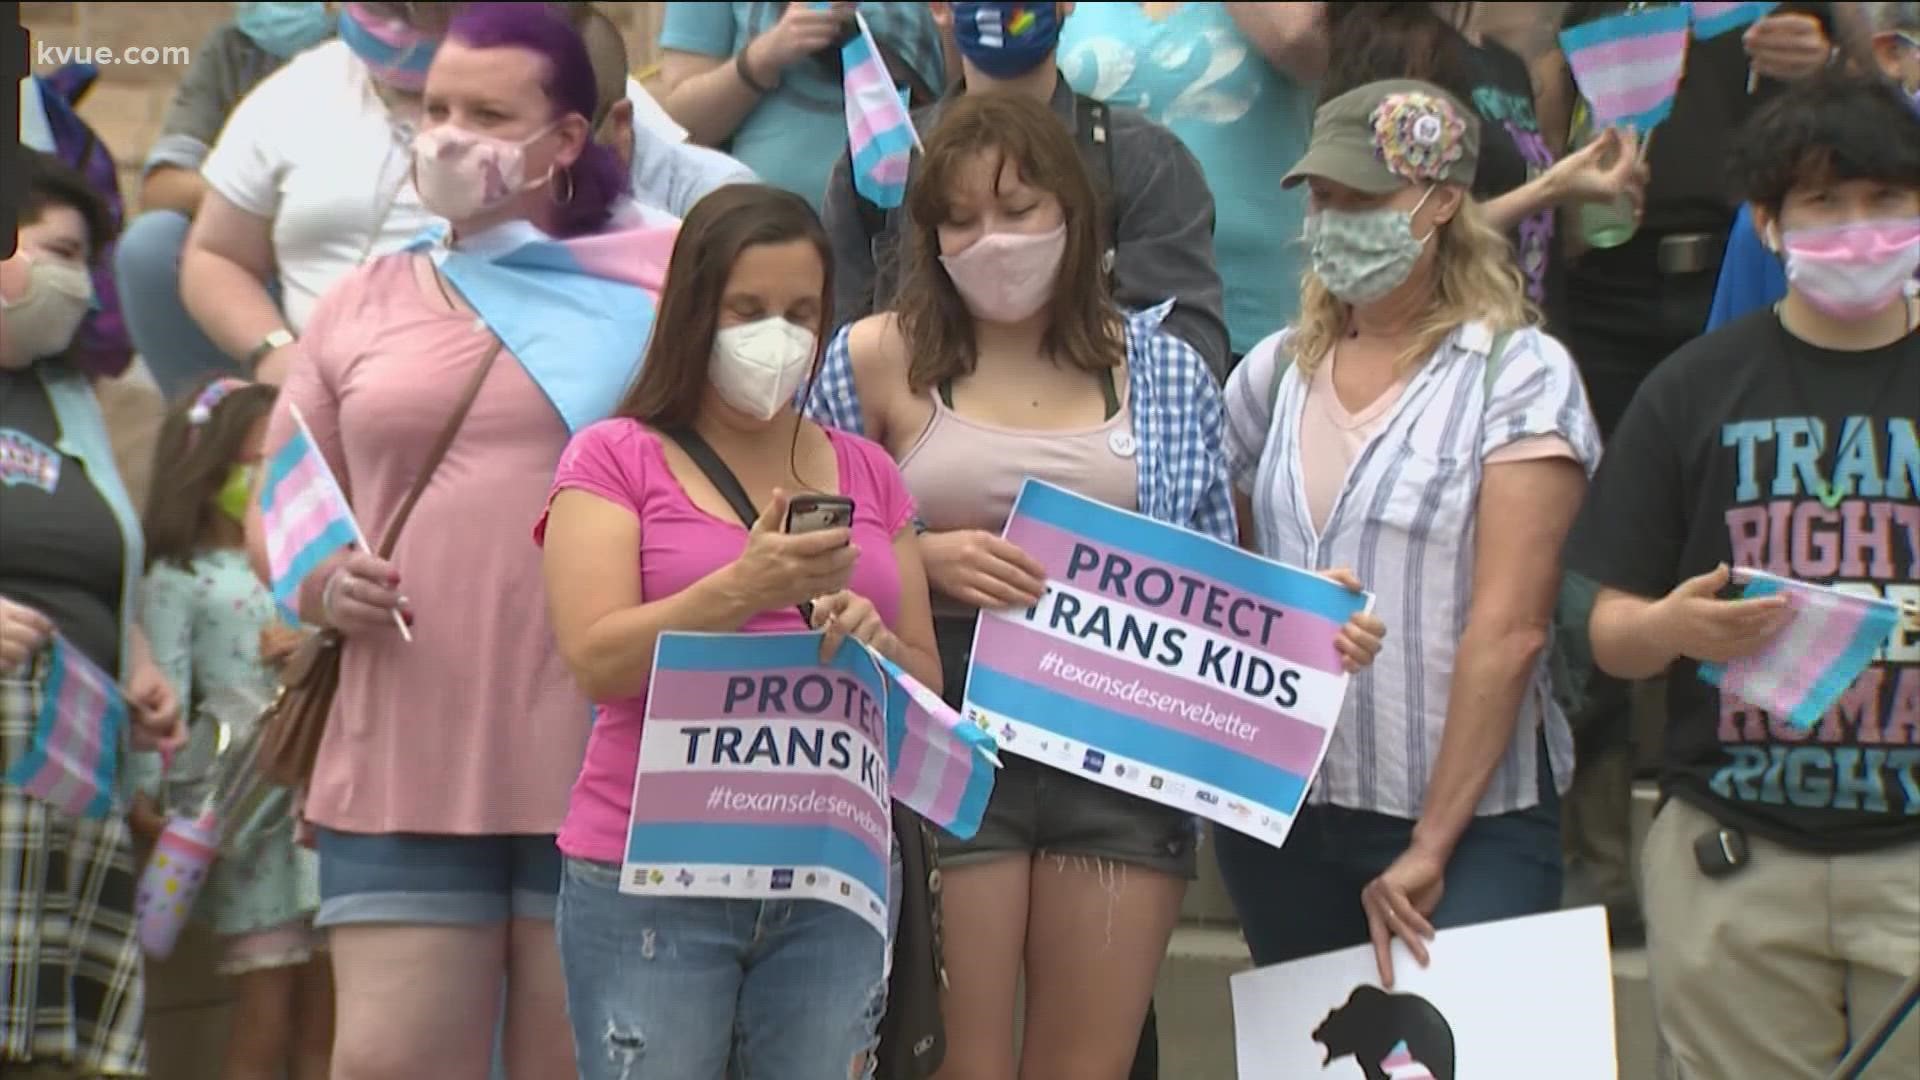 Texas families rallied in support of transgender children on Wednesday. It comes as the ACLU sued Texas over its directive to investigate sex-change procedures.